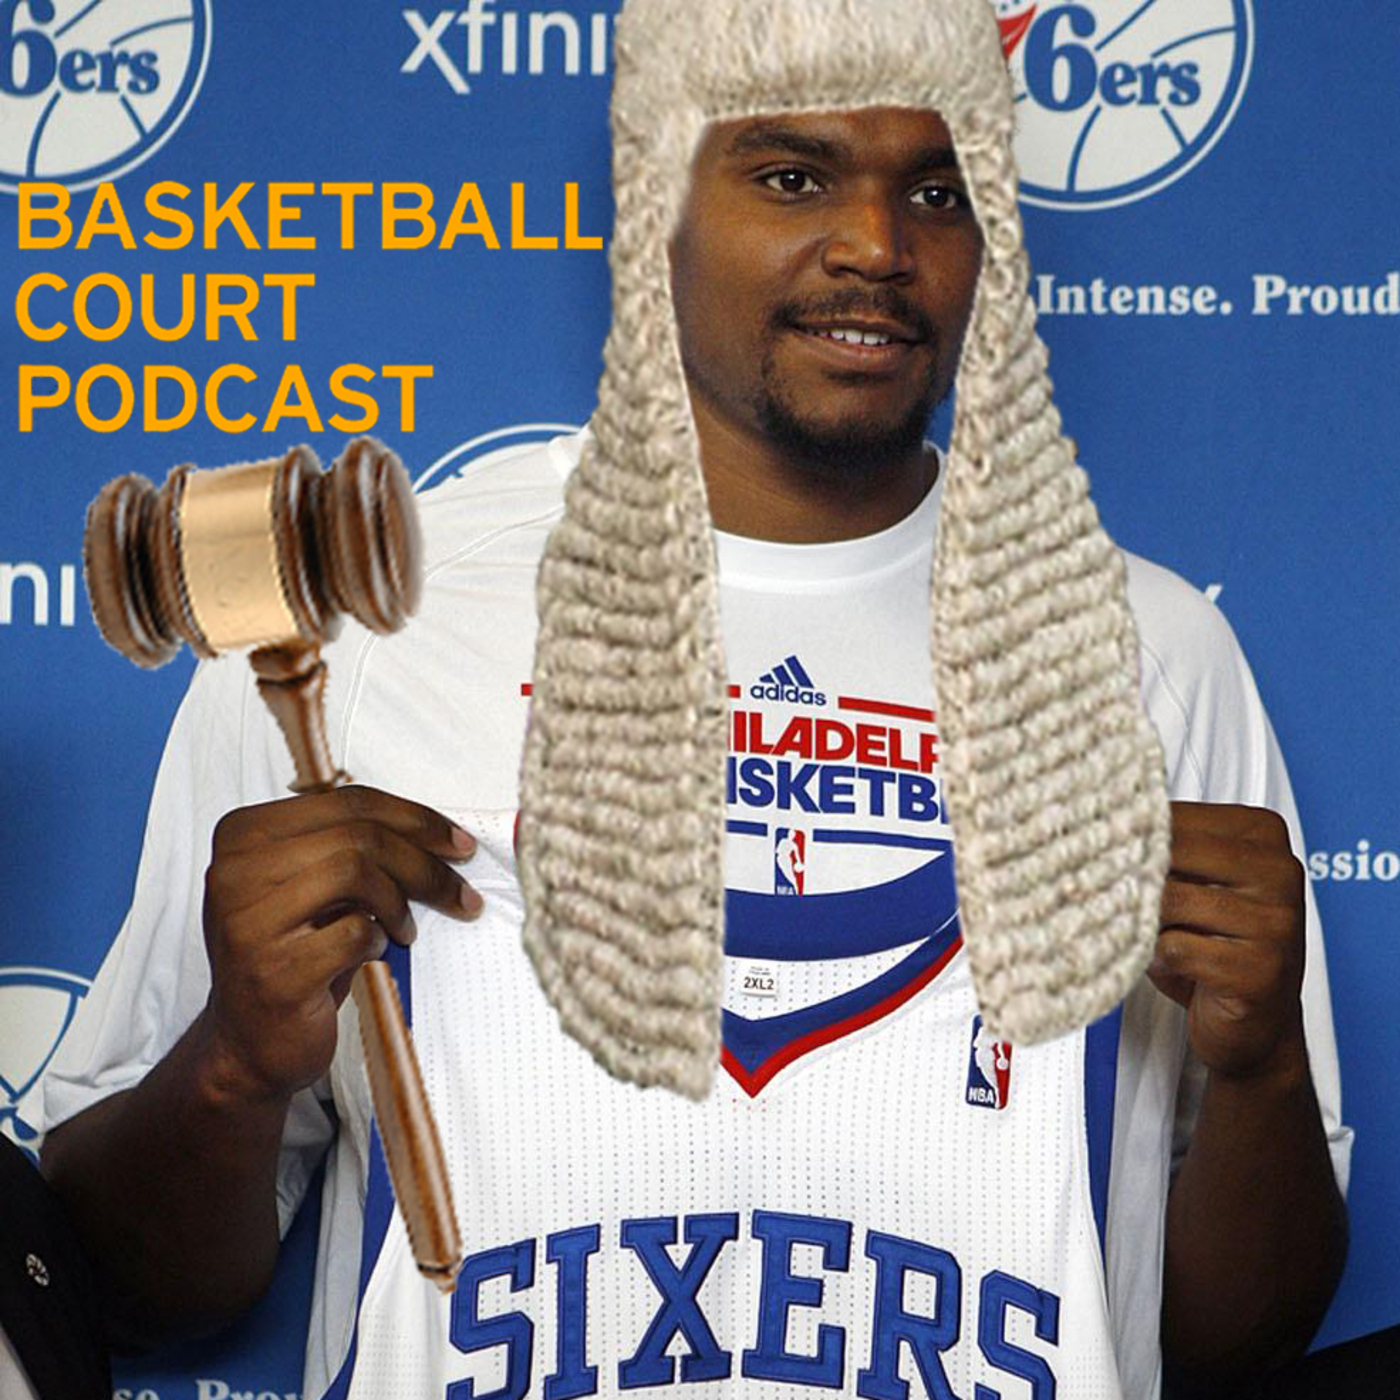 Episode 12: Andrew L. Bynum v. The Process, Inc.